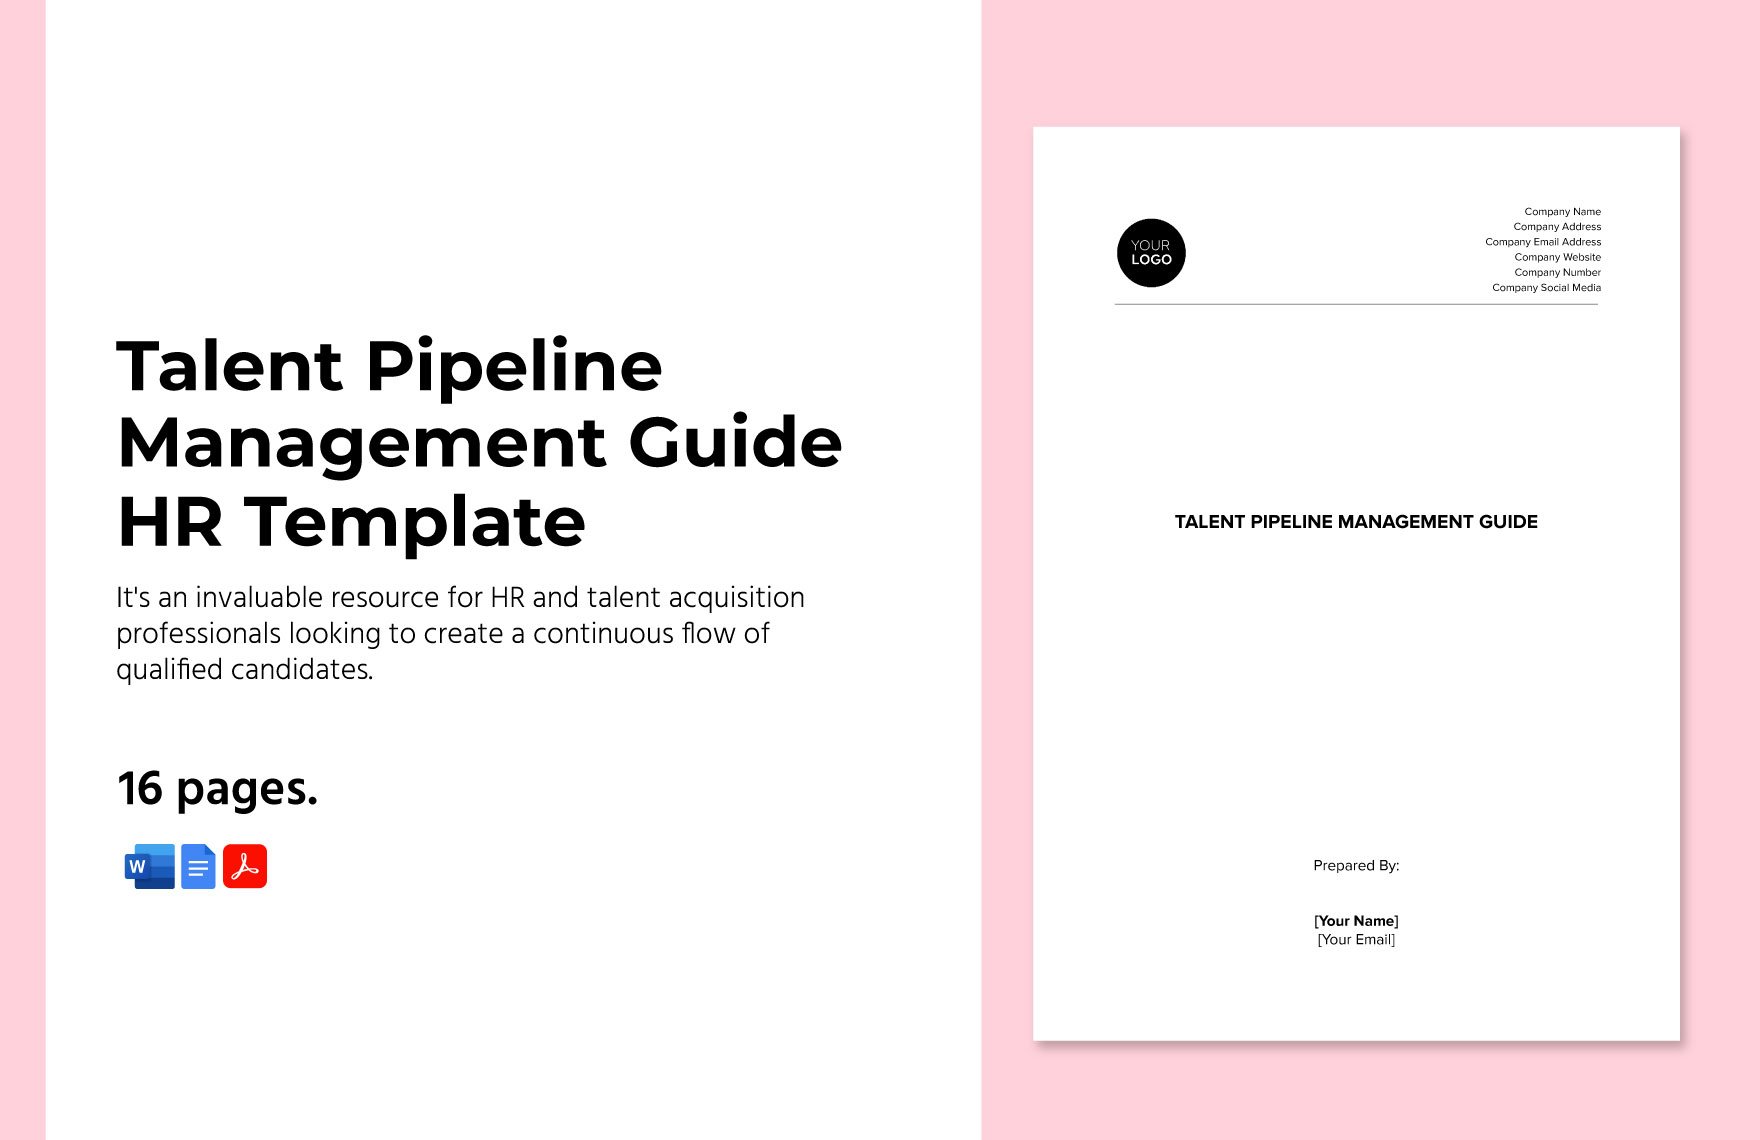 Talent Pipeline Management Guide HR Template